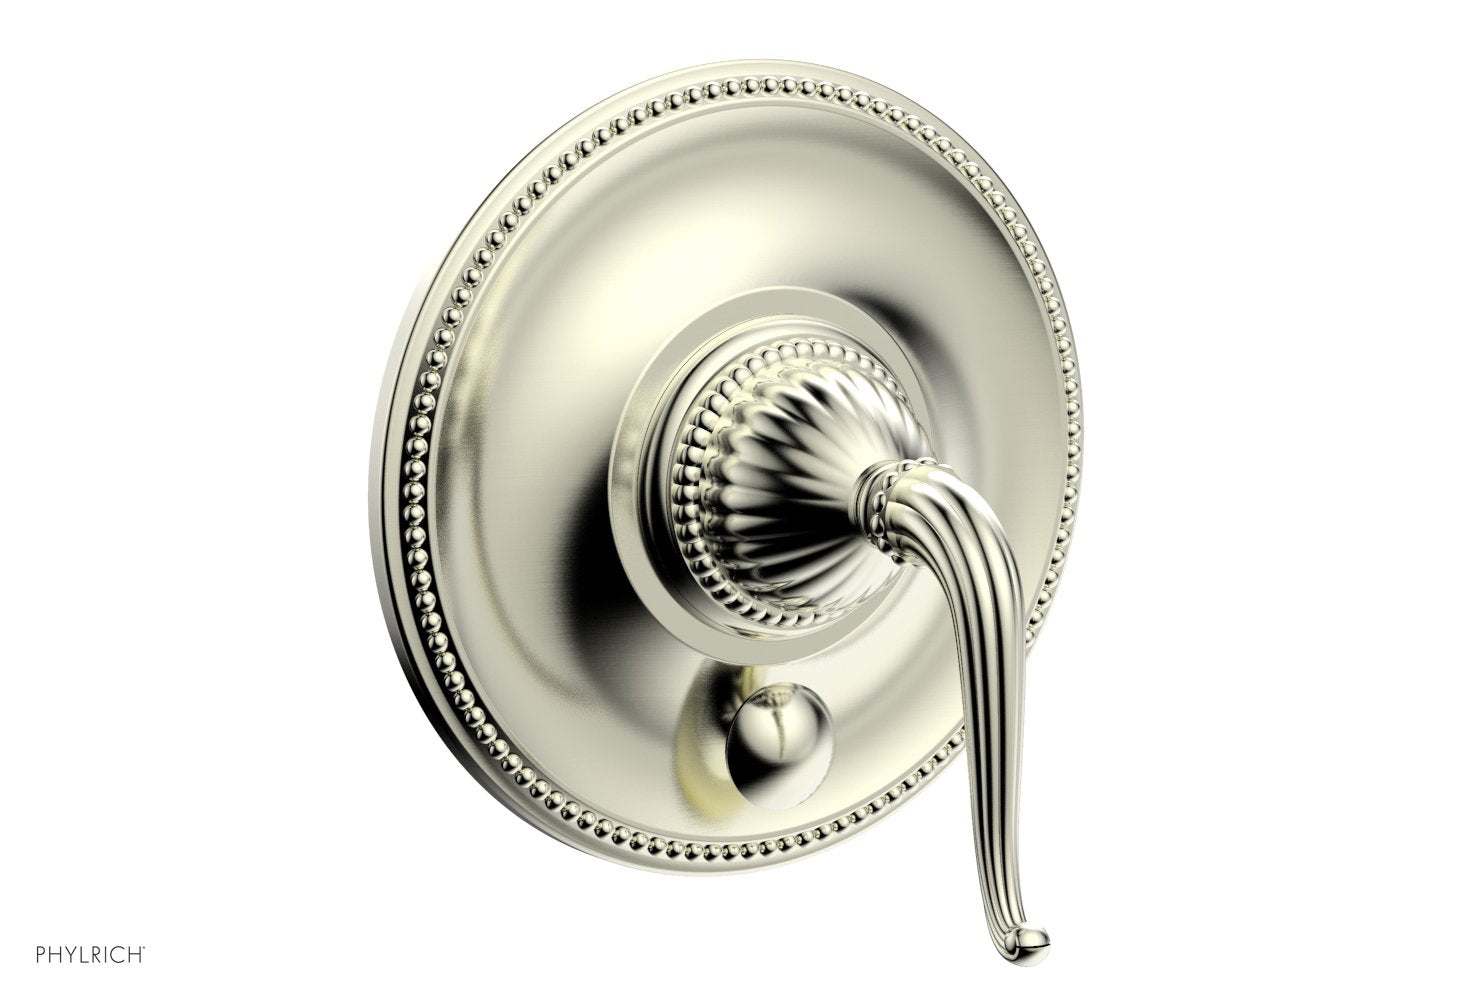 Phylrich GEORGIAN & BARCELONA Pressure Balance Shower Plate with Diverter and Handle Trim Set